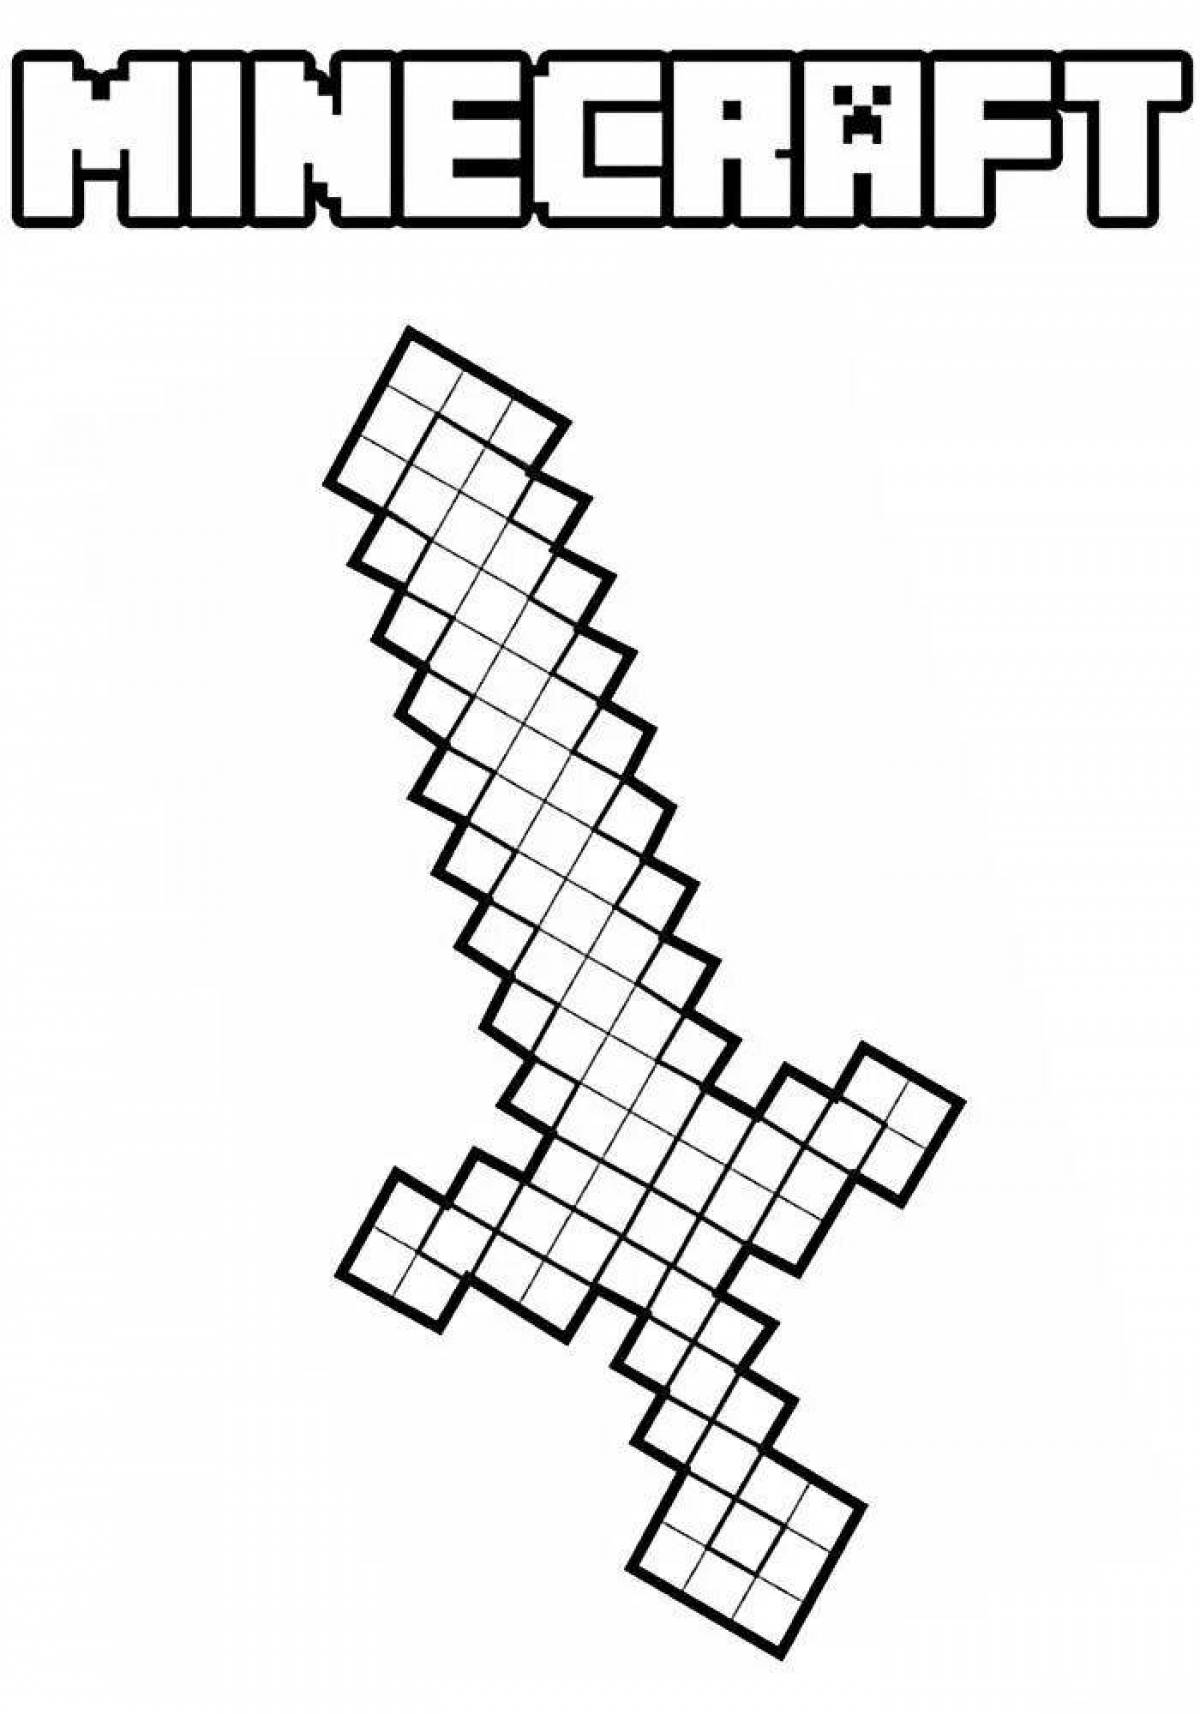 Fascinating minecraft diamond coloring page